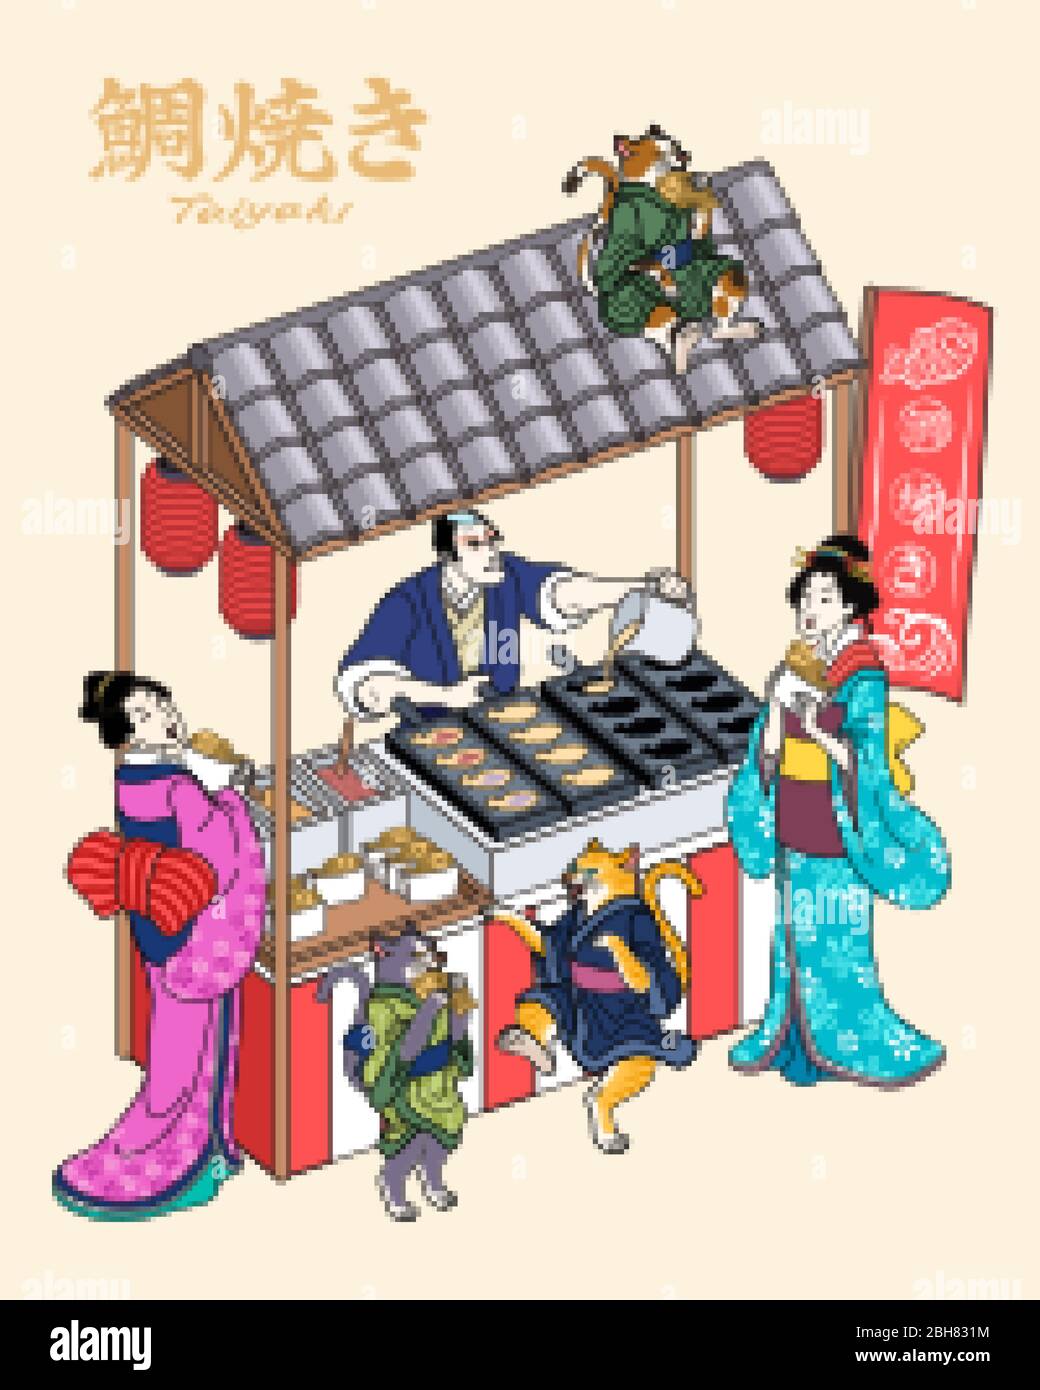 People visits taiyaki street vendor in ukiyo-e style, fish-shaped cake written in Japanese texts on flags and upper left Stock Vector